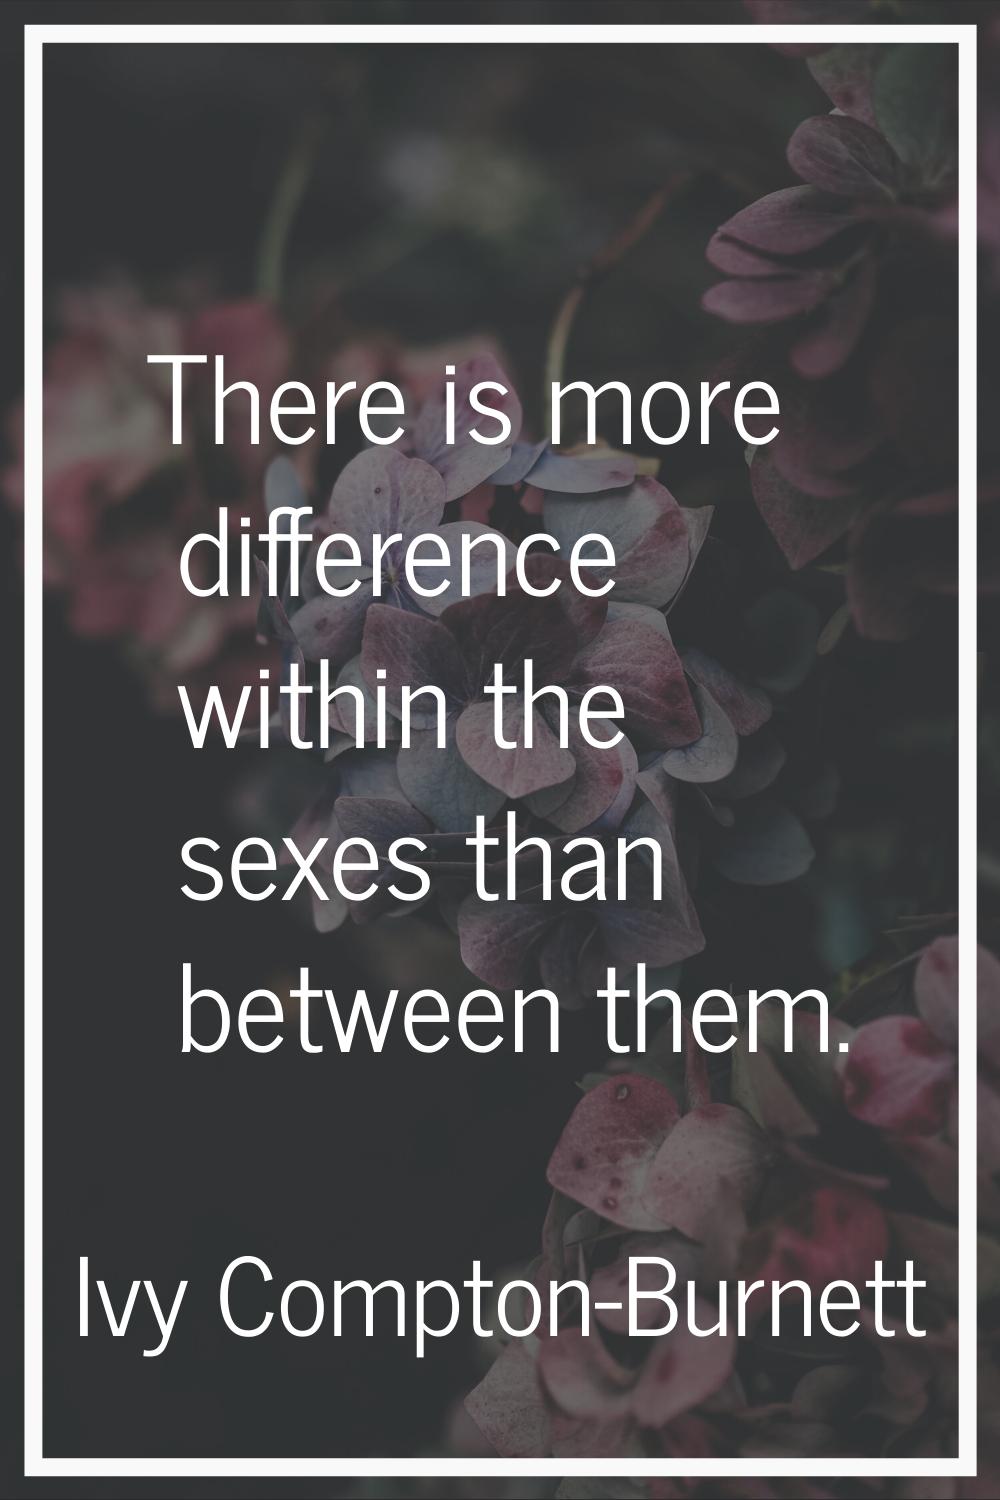 There is more difference within the sexes than between them.